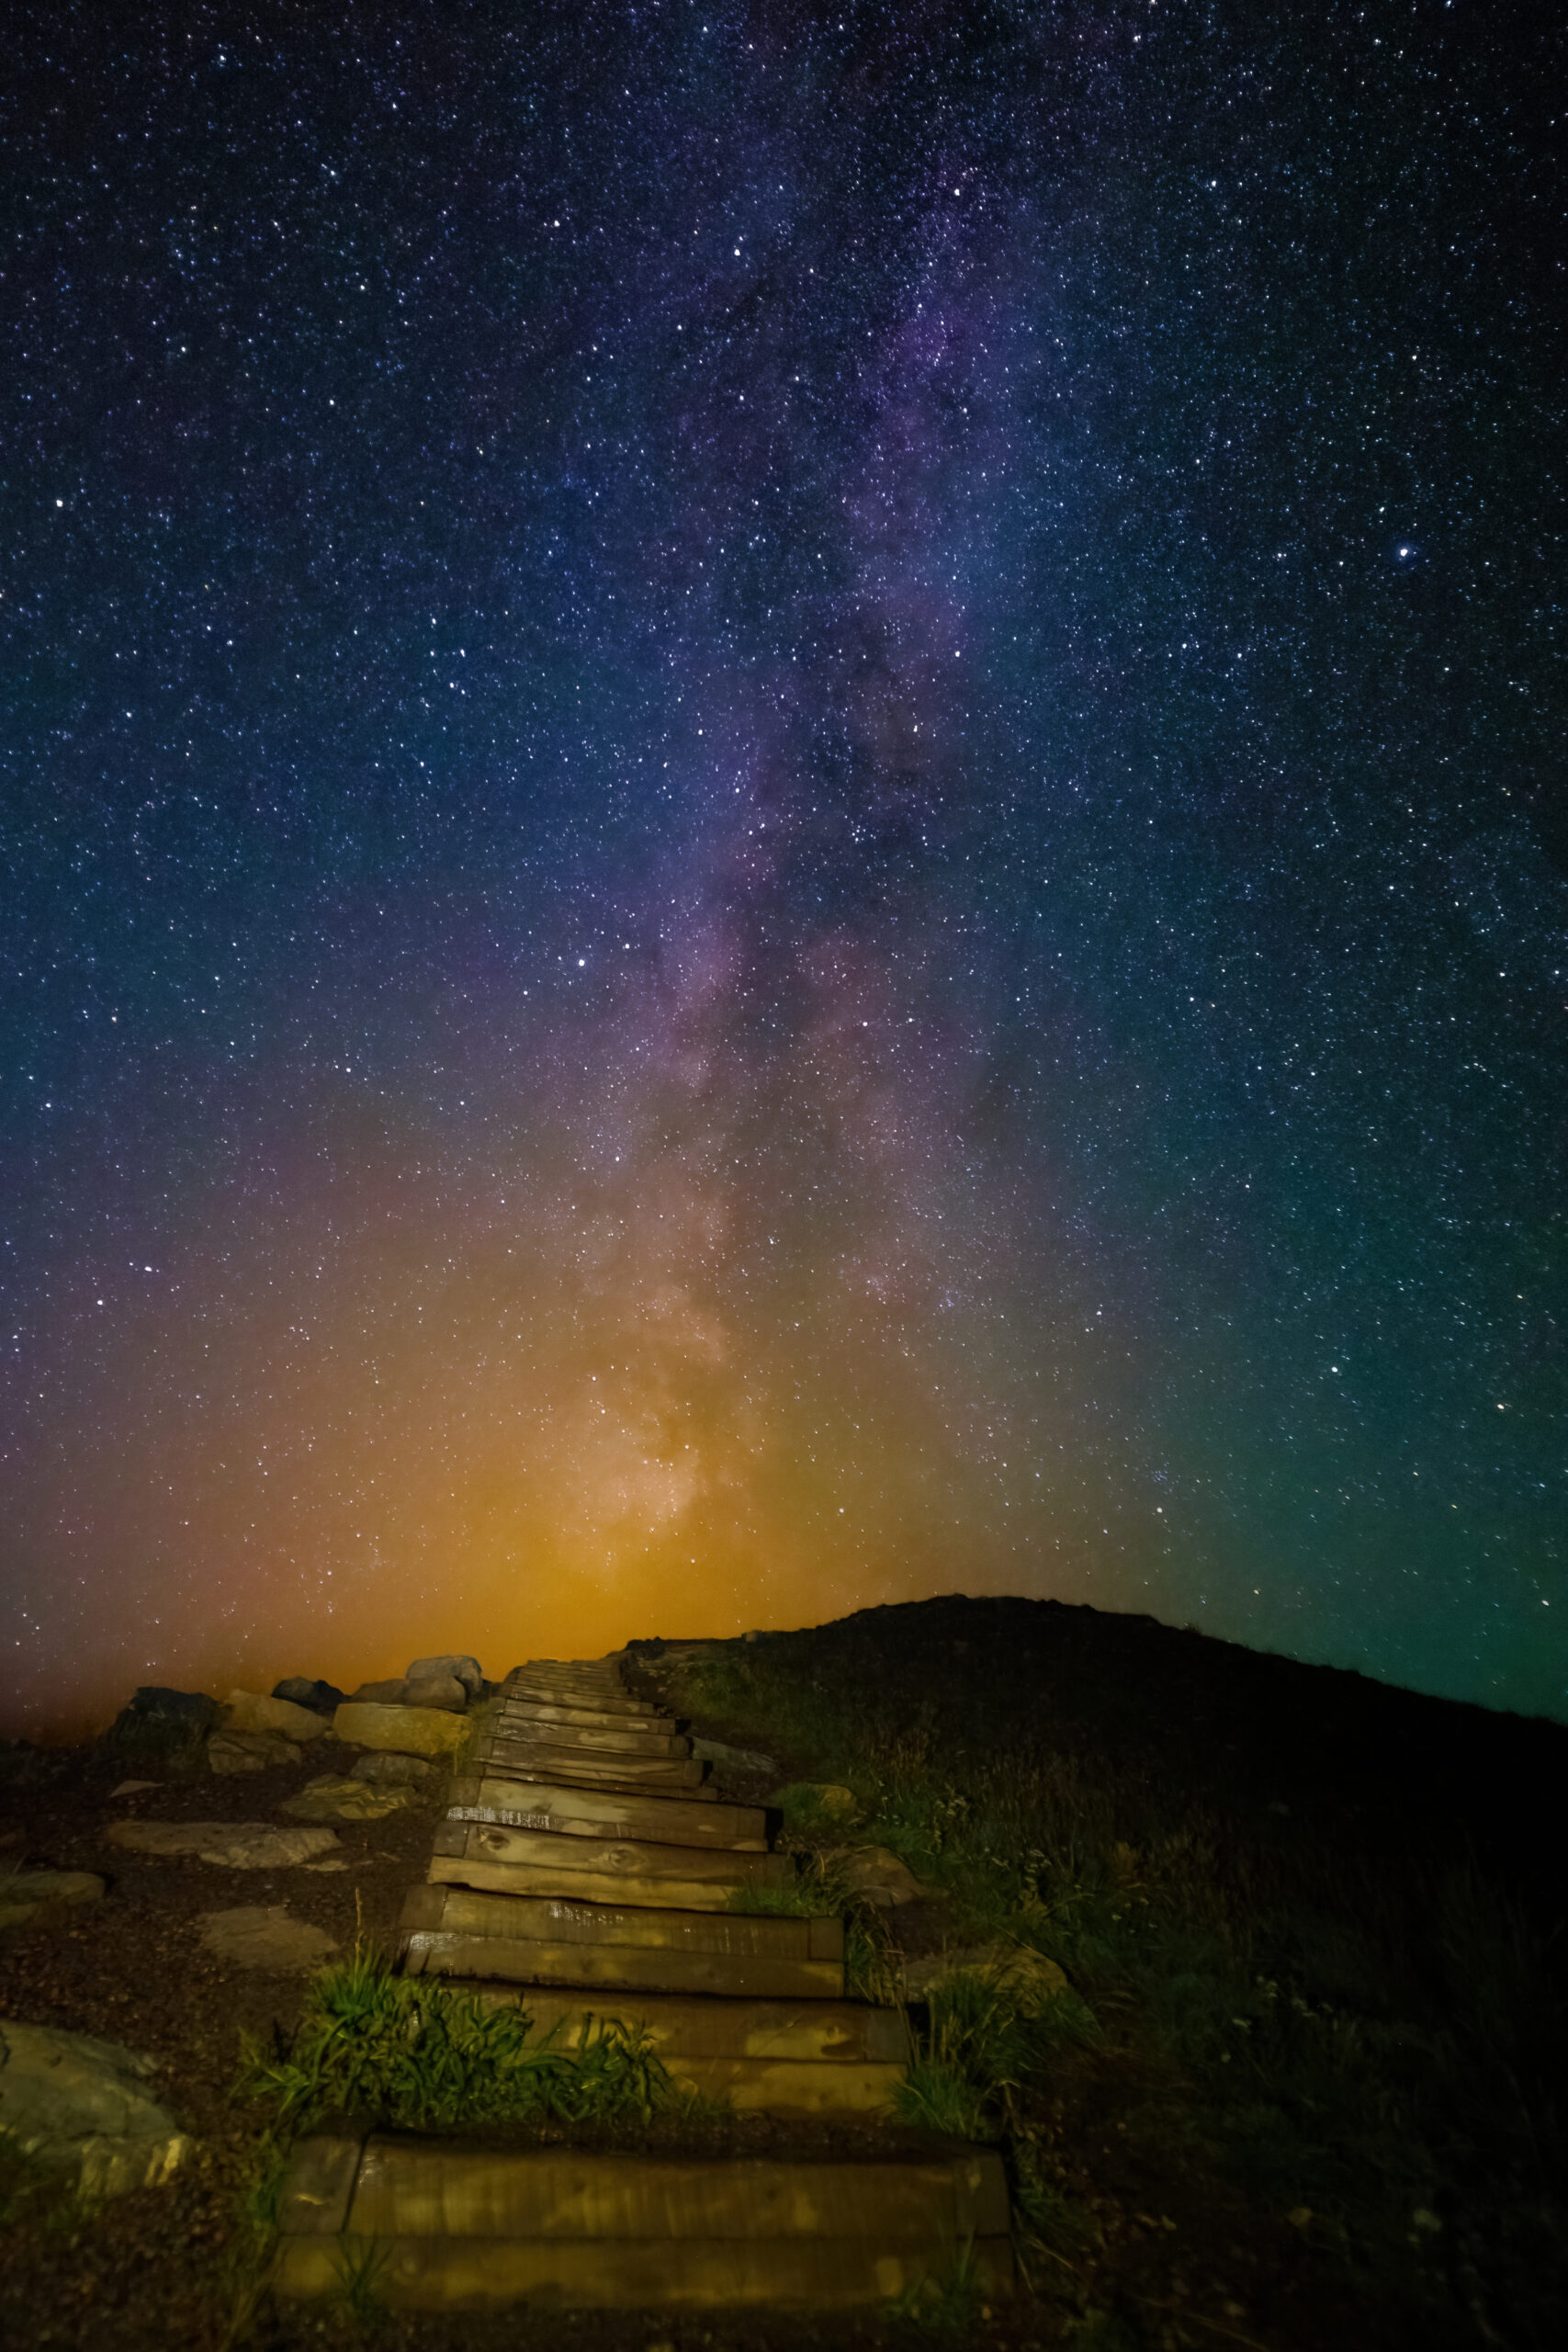 Stairway to the Milky Way